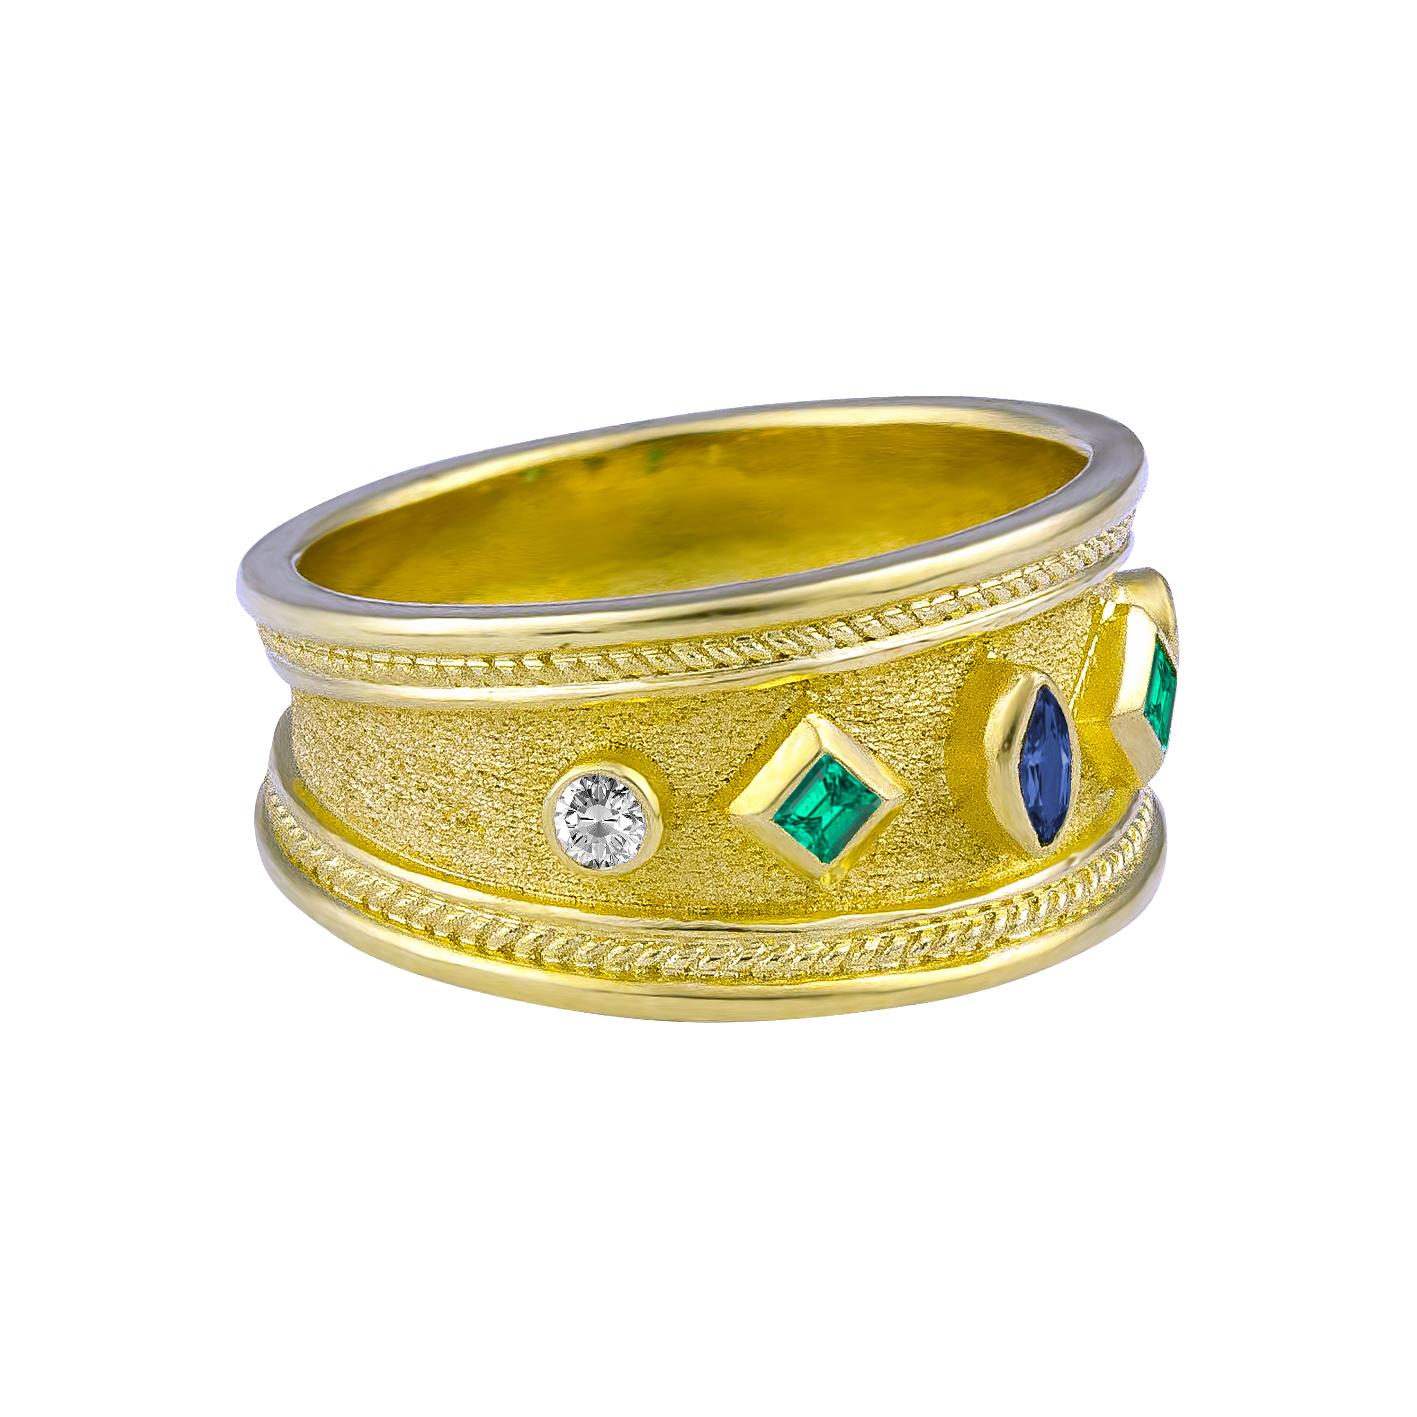 S.Georgios designer 18 Karat Solid Yellow Gold Band Ring is all handmade with Byzantine granulation workmanship and a unique velvet background. The gorgeous ring features a center 0.10 Carat Marquise Sapphire and on the sides, 2 natural Emeralds